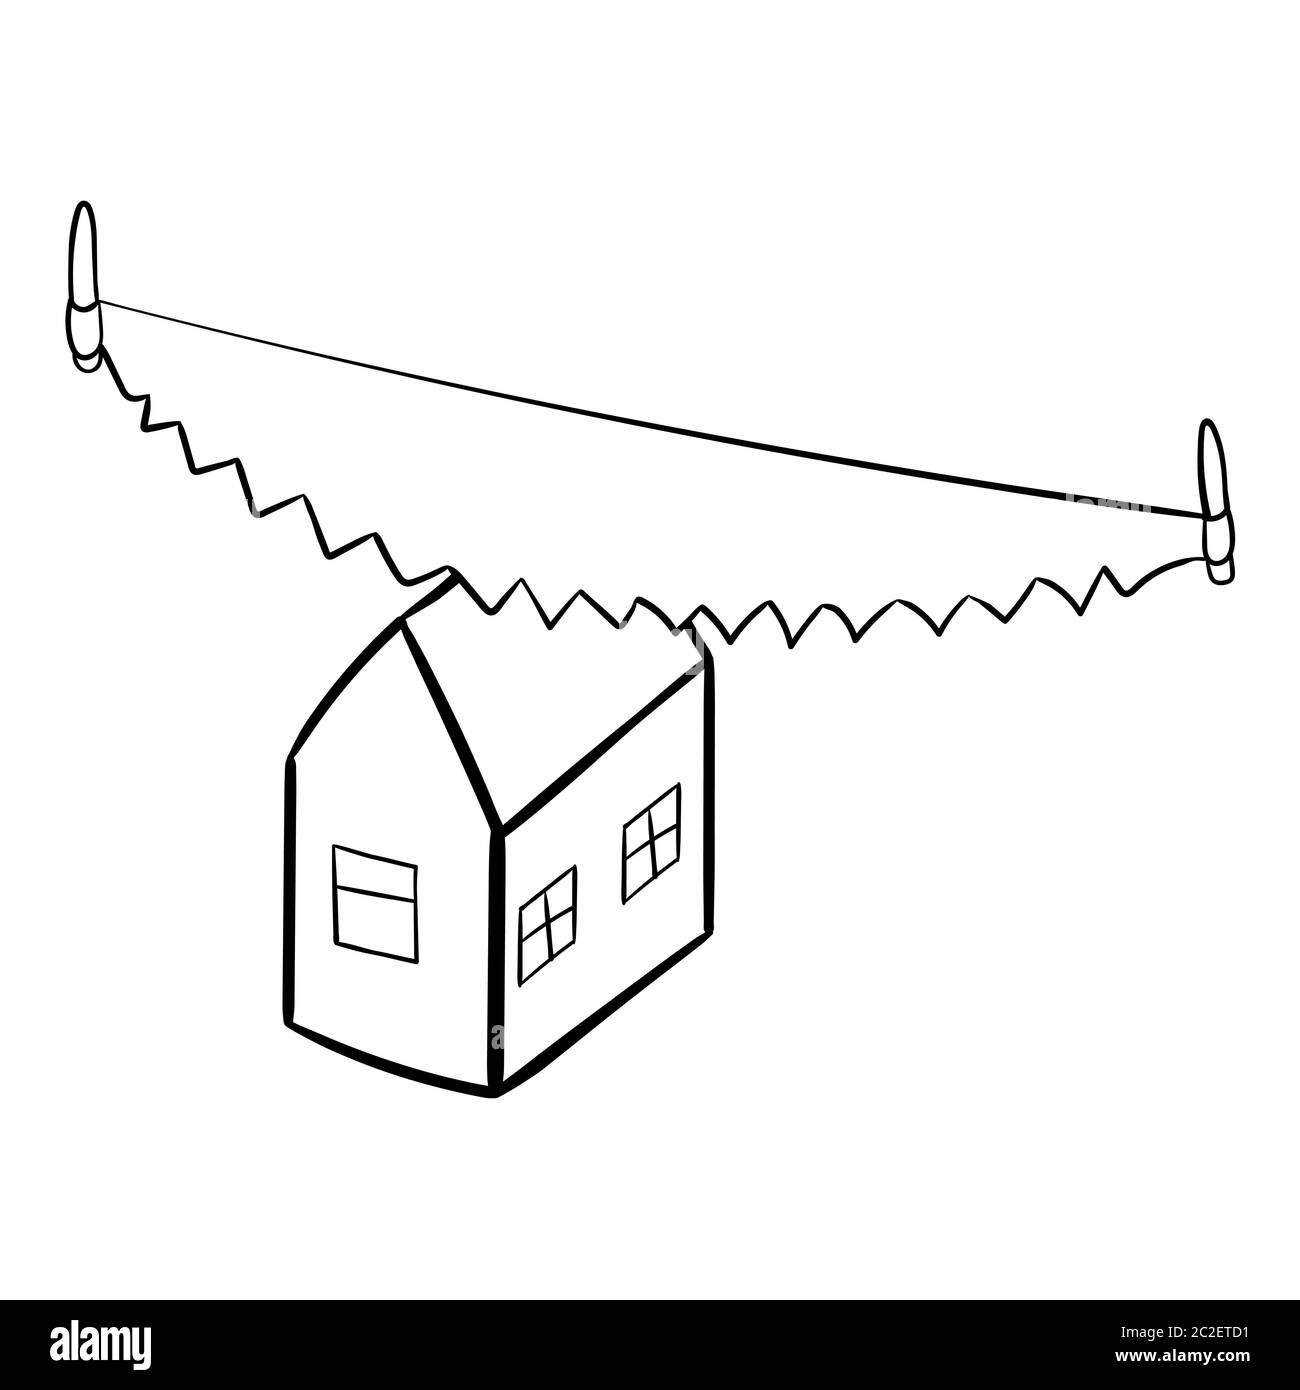 concept of divorce and division of property. saw cuts the house in half. Black and white sketch vector illustration Stock Vector